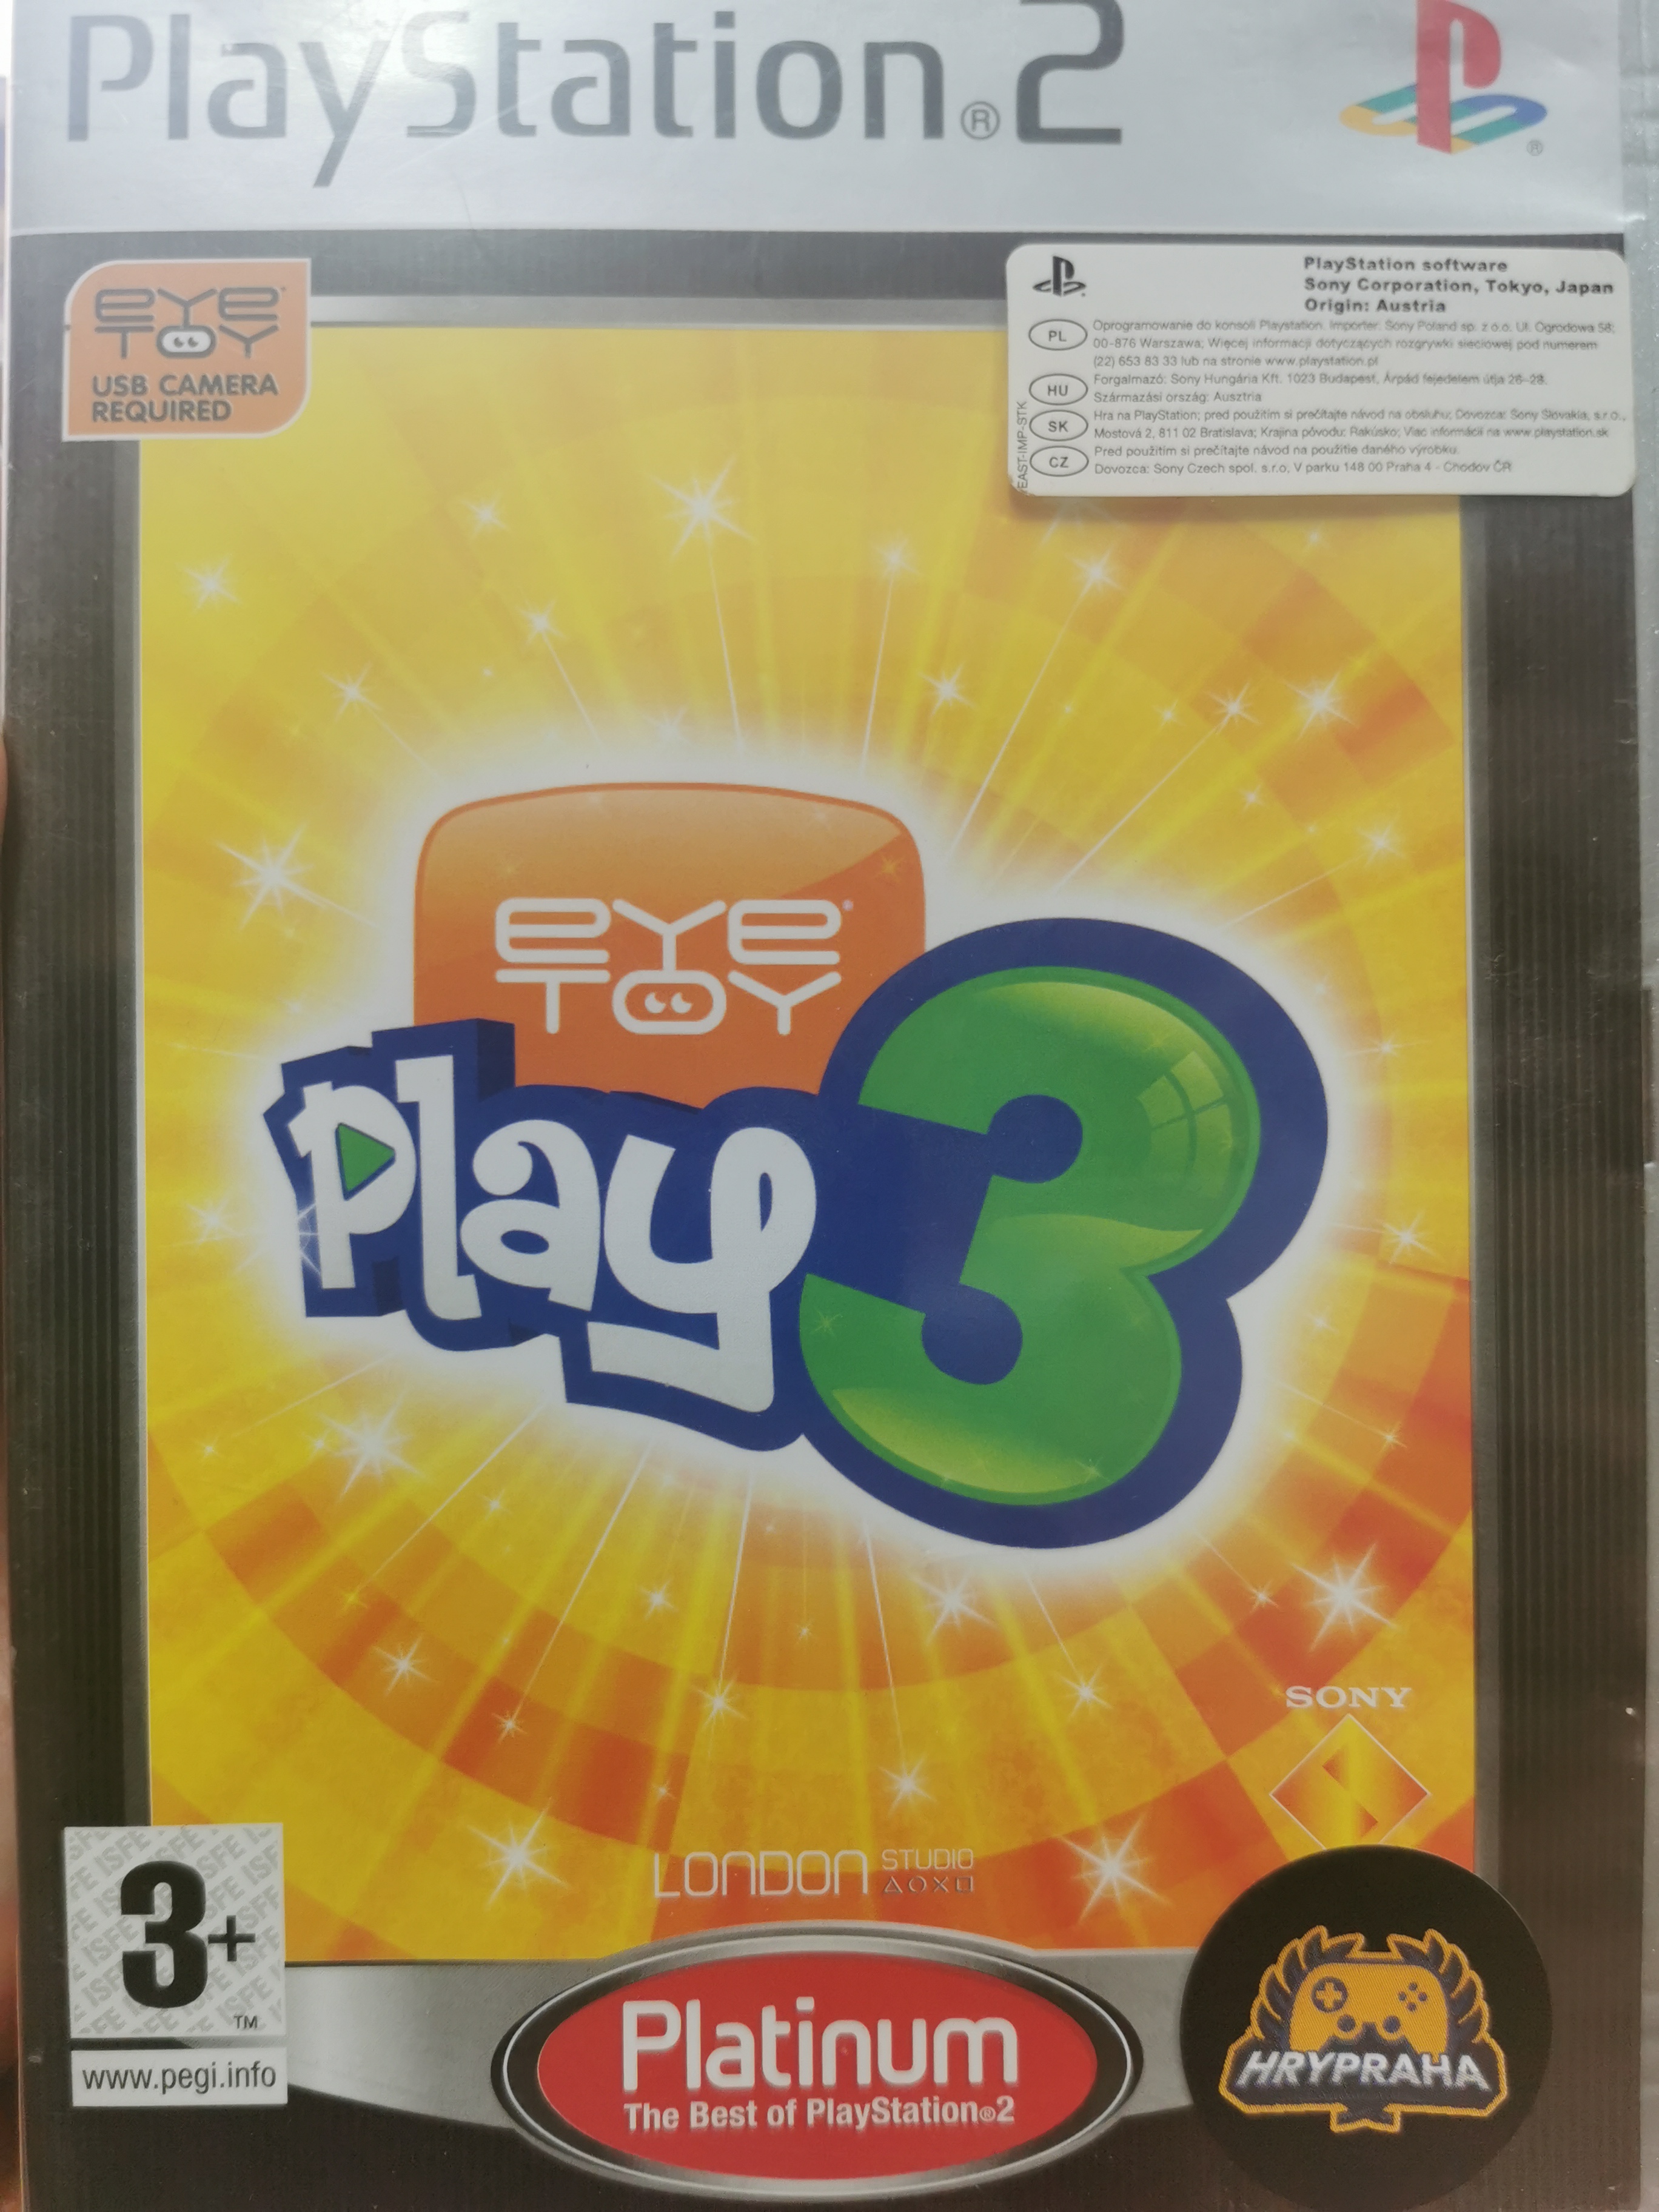 Eye toy: Play 3 PS2